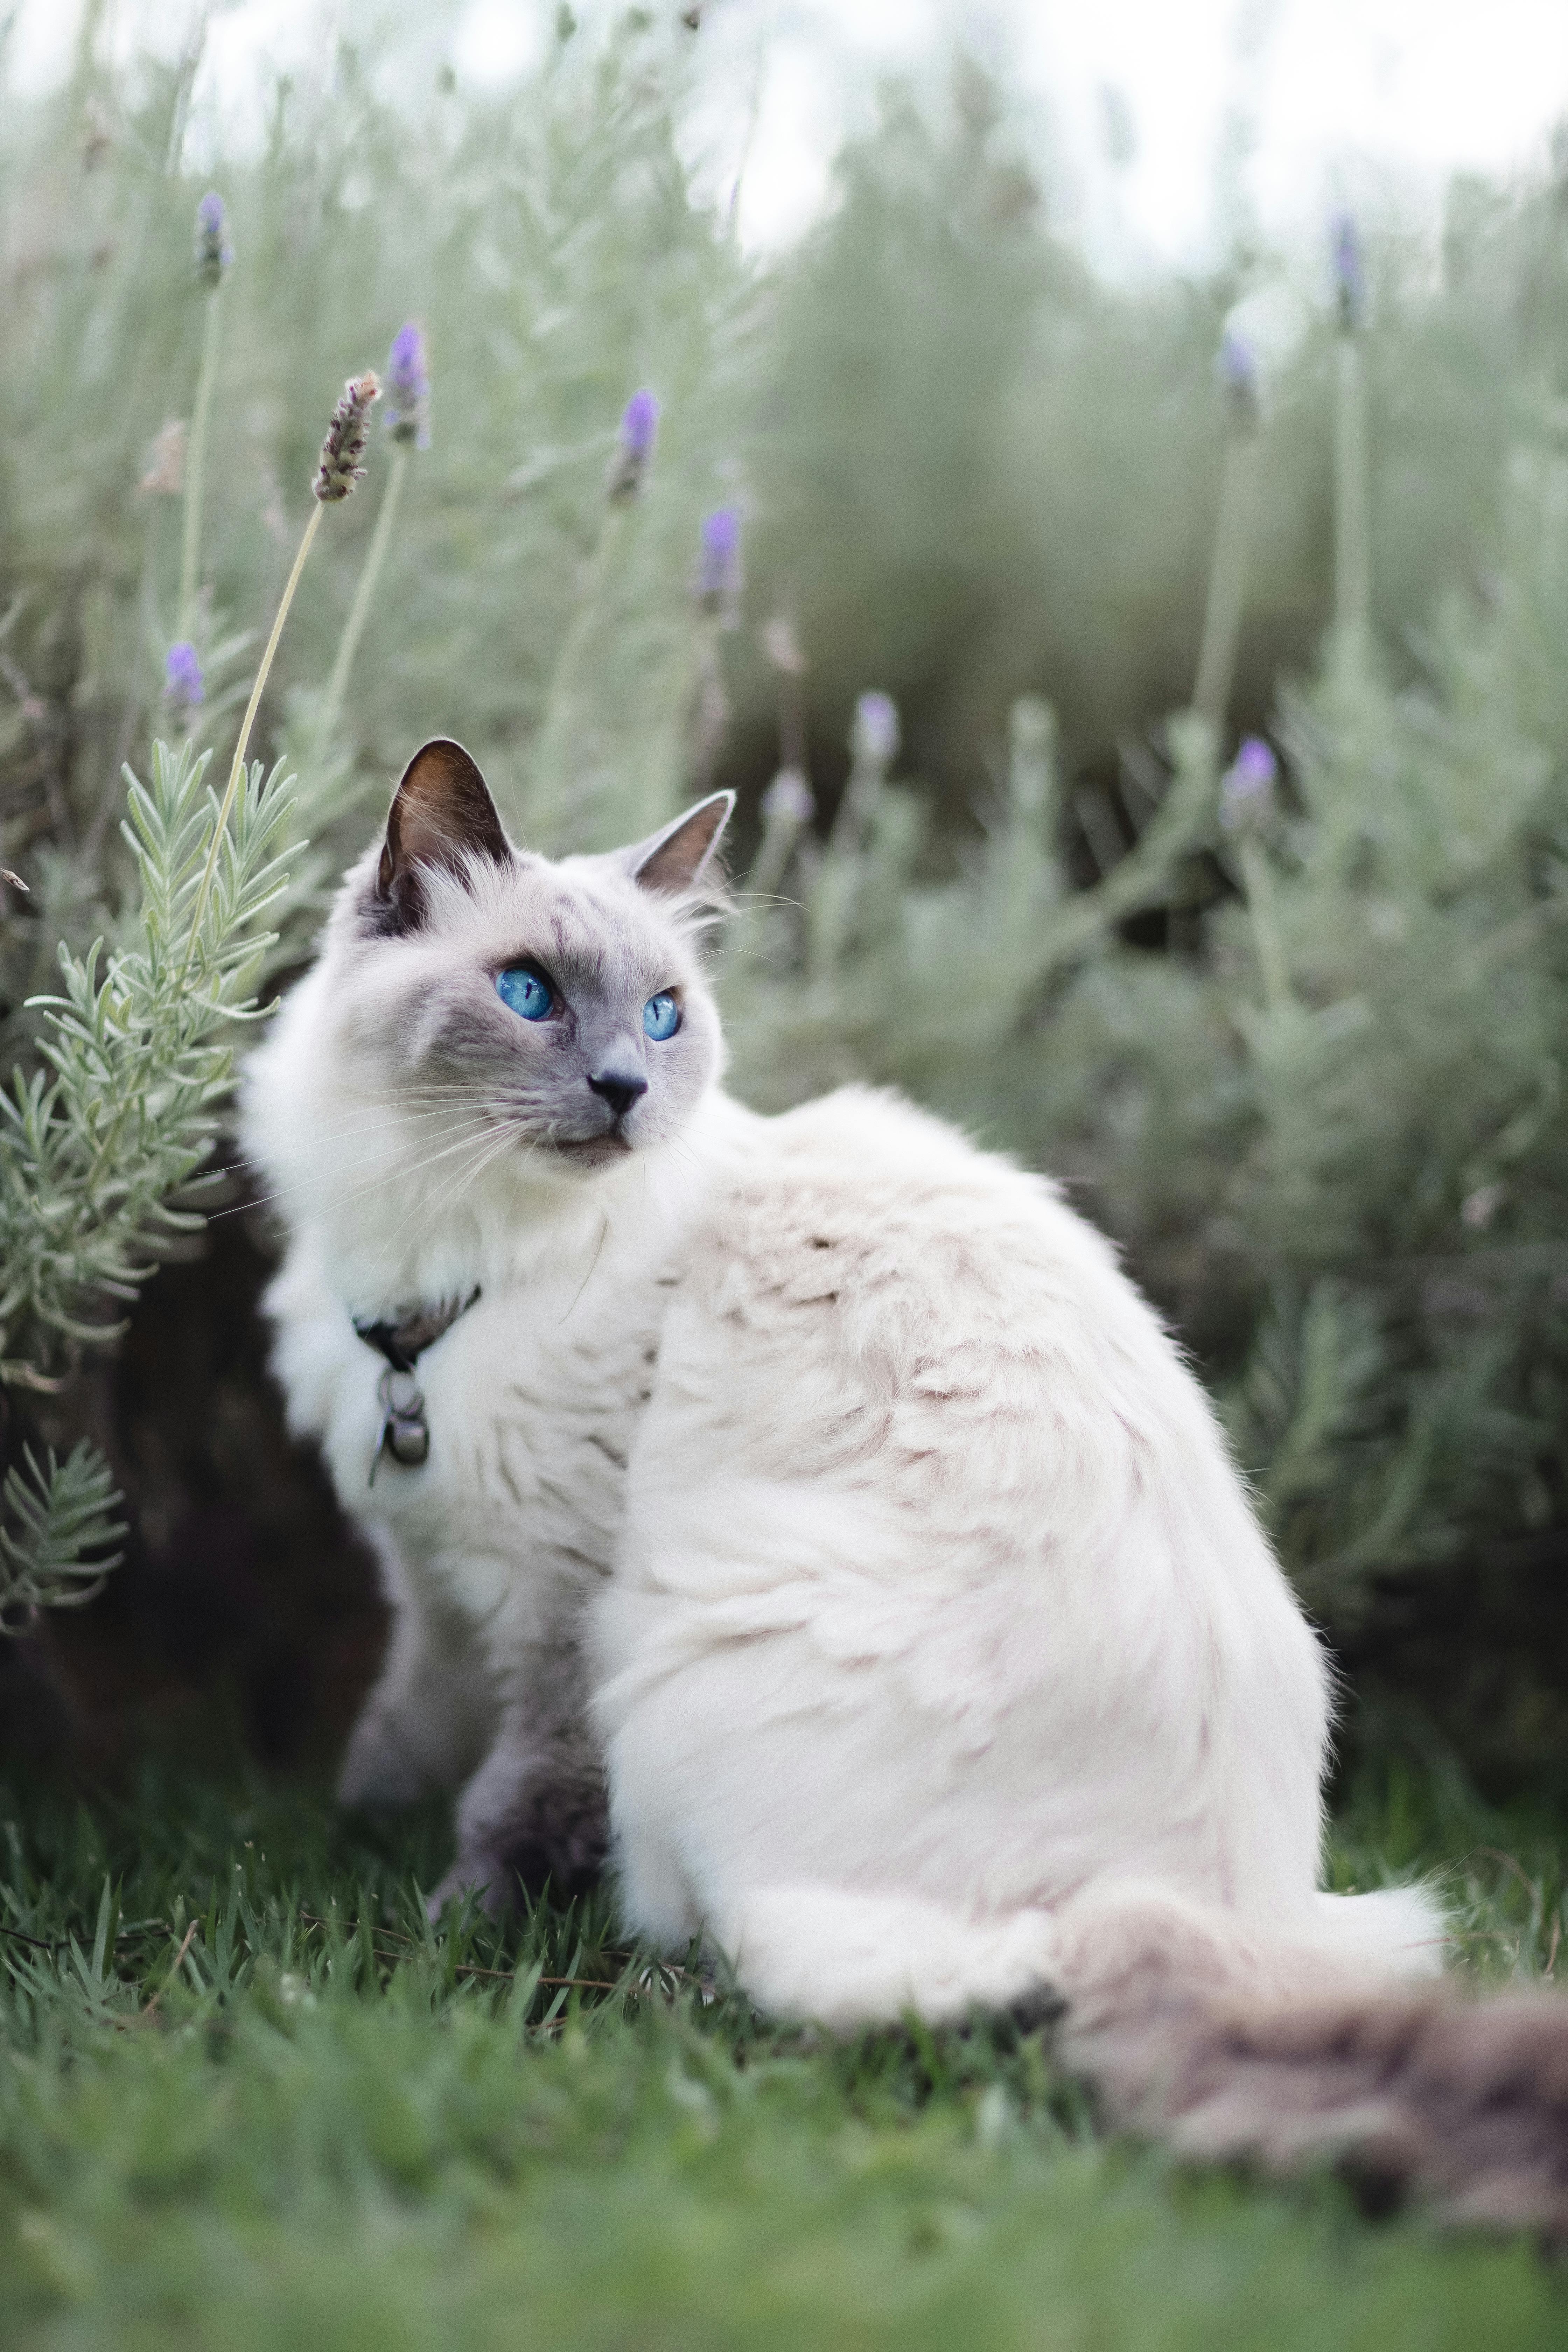 attentive purebred cat with fluffy fur sitting on grass